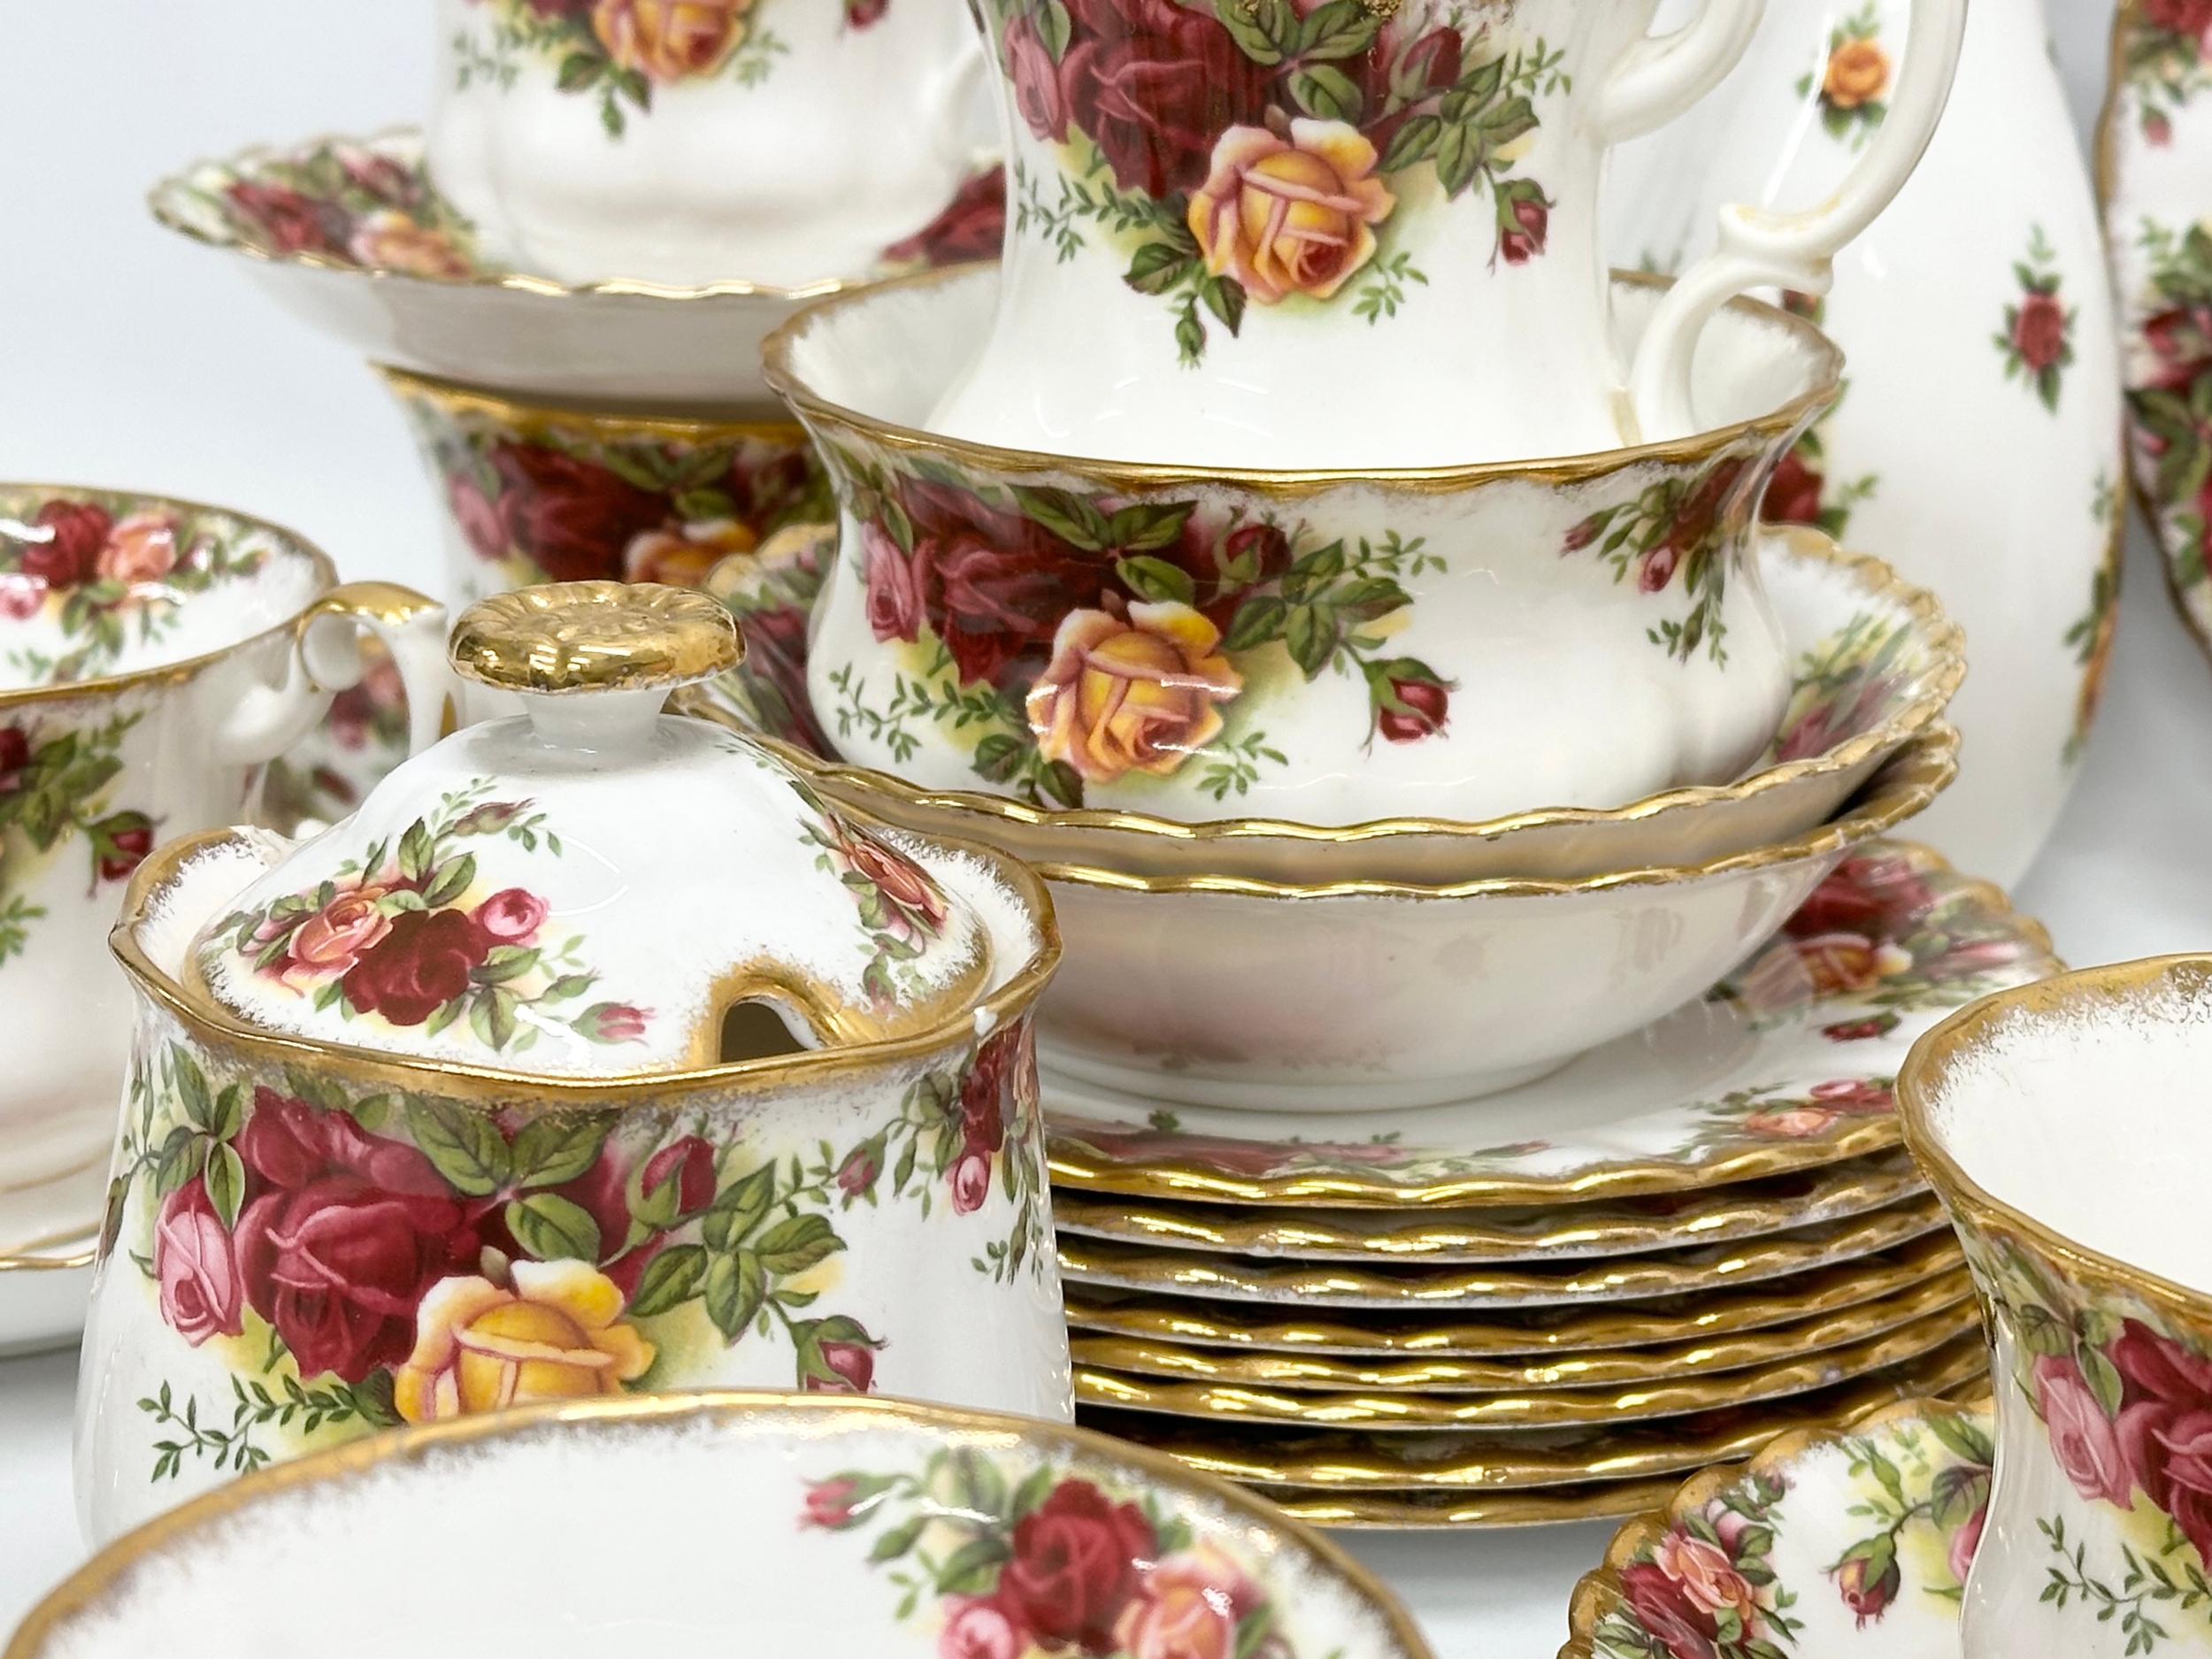 32 piece of Royal Albert ‘Old Country Roses’ tea service. 2 salad plates, a vase, sugar bowl with - Image 3 of 6